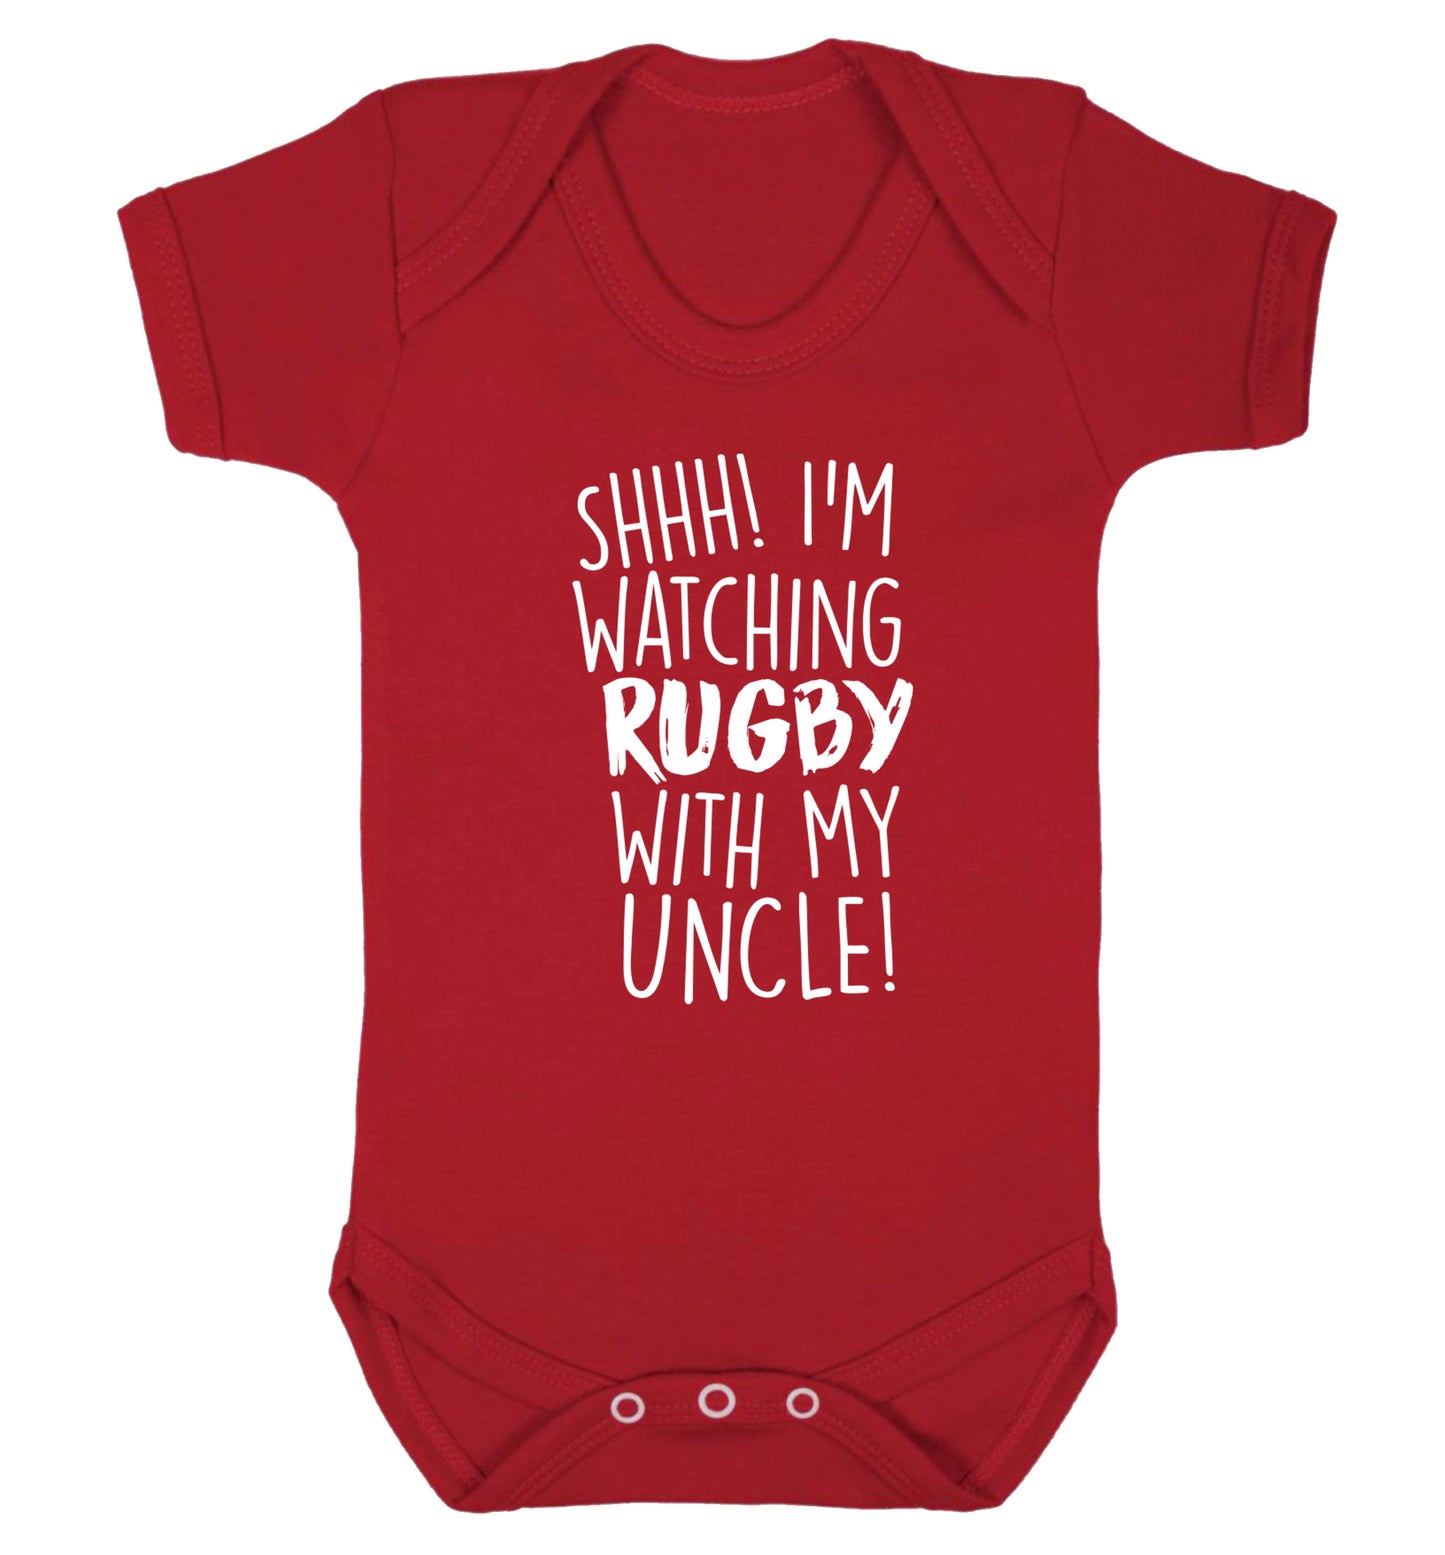 Shh.. I'm watching rugby with my uncle Baby Vest red 18-24 months